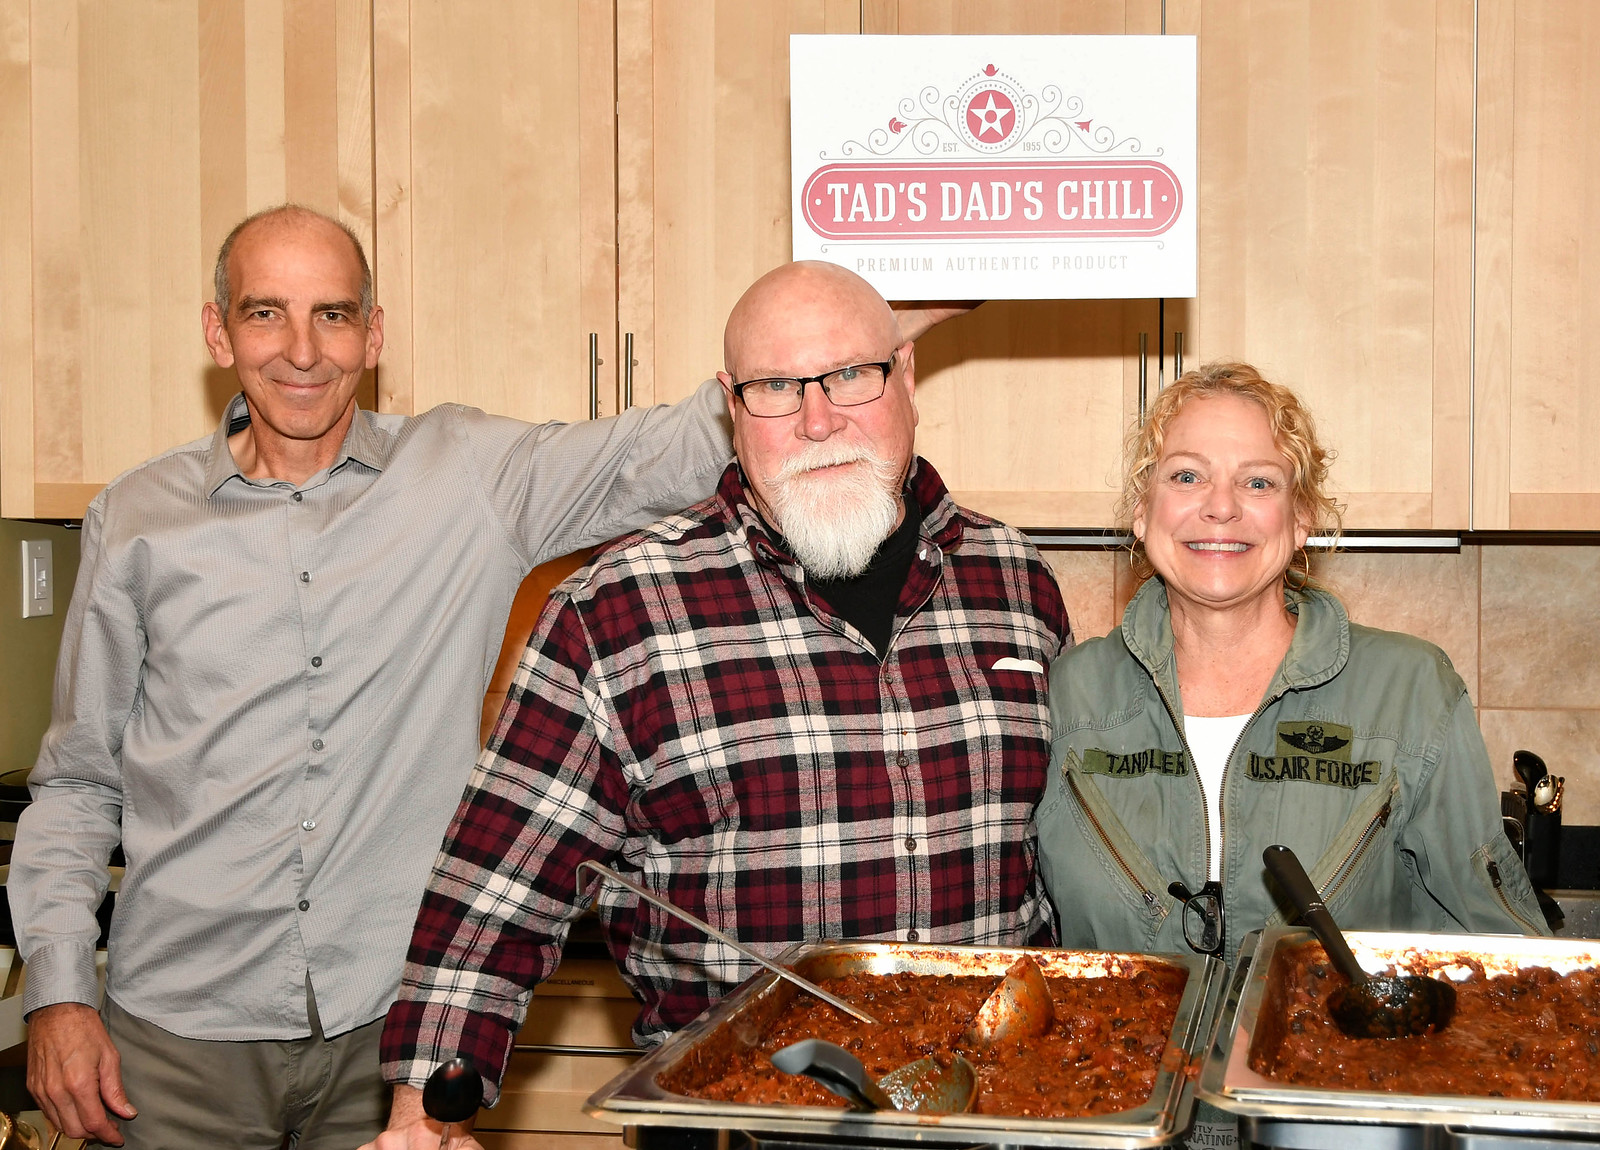 Helping launch Tad's Dad's Chili